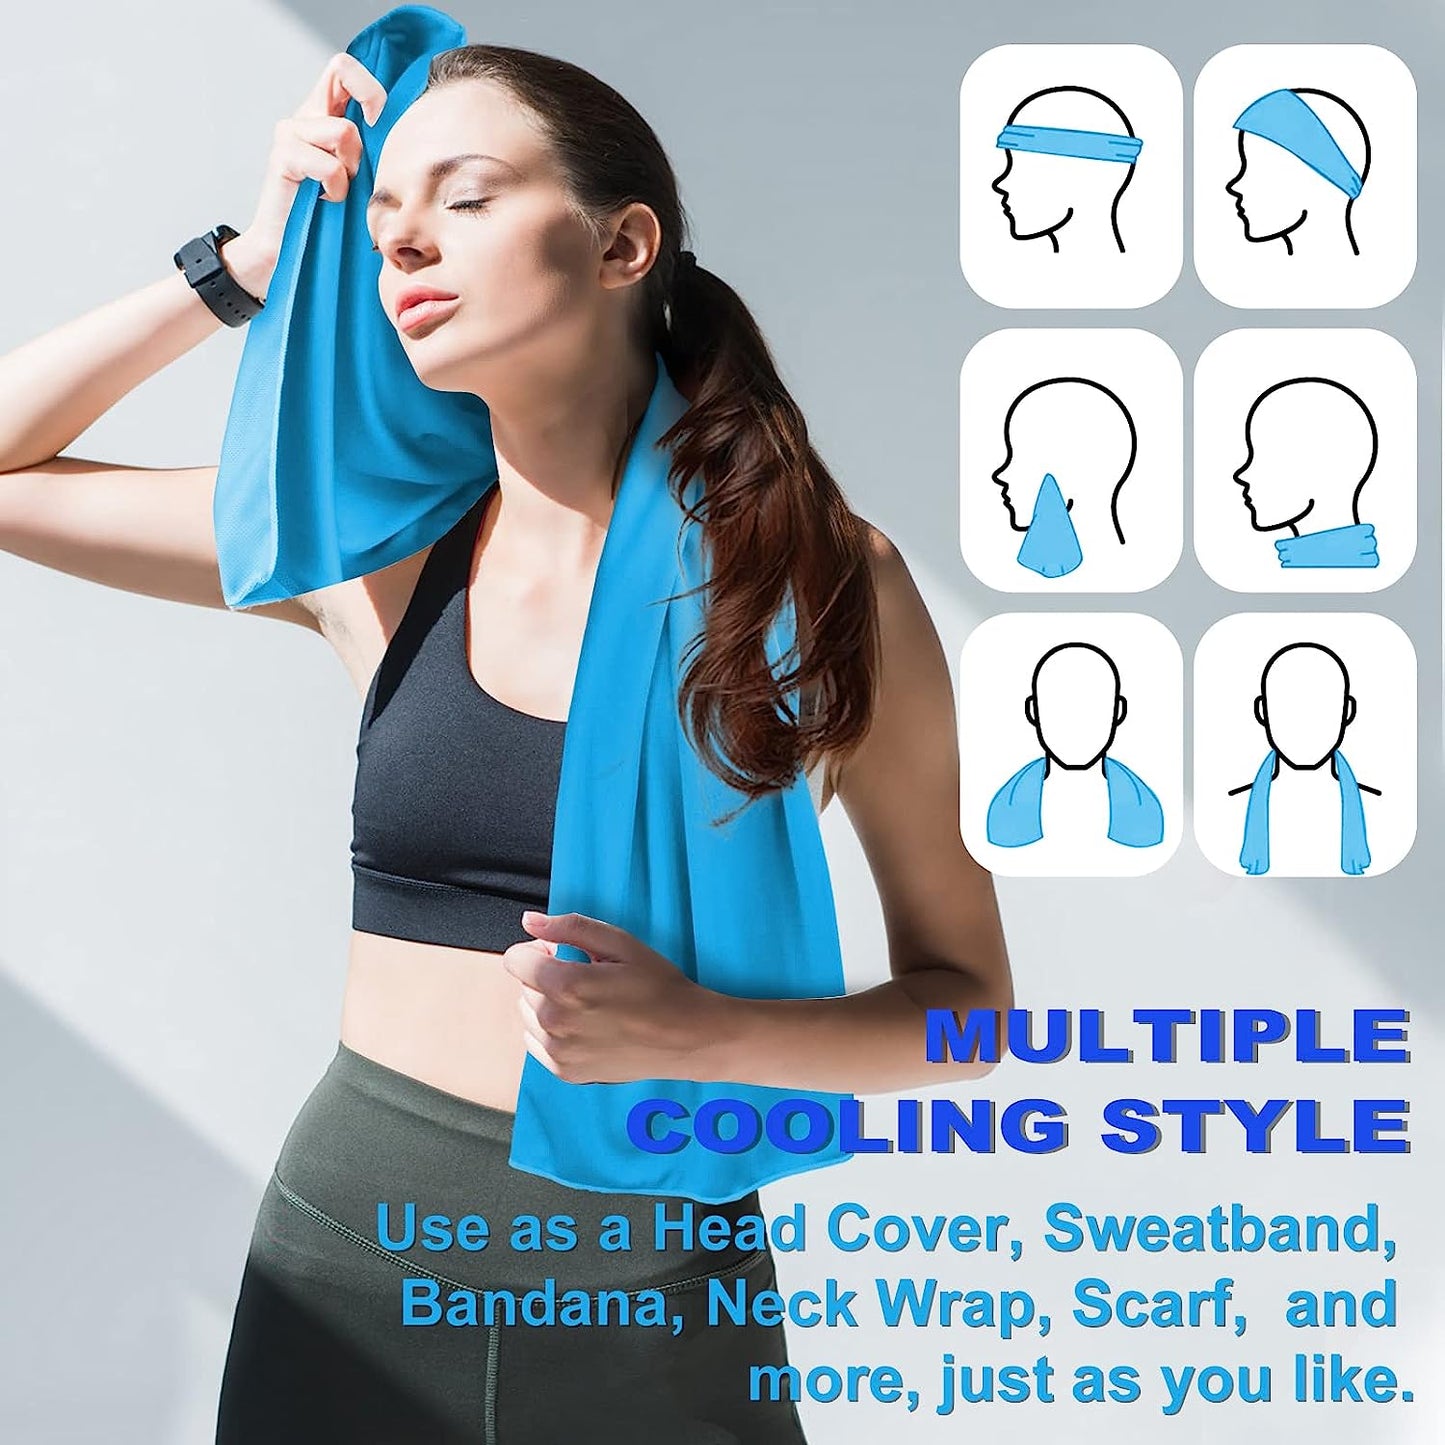 Meiyane Cooling Towels for Neck and Face 15.7" x 43.3" Cooling Towel for Hot Weather Quick Dry Workout Sweat Towel for Gym Soft Breathable Microfiber Towel for Fitness Workout Camping Yoga Women Man (Amazon Cooling Towels)